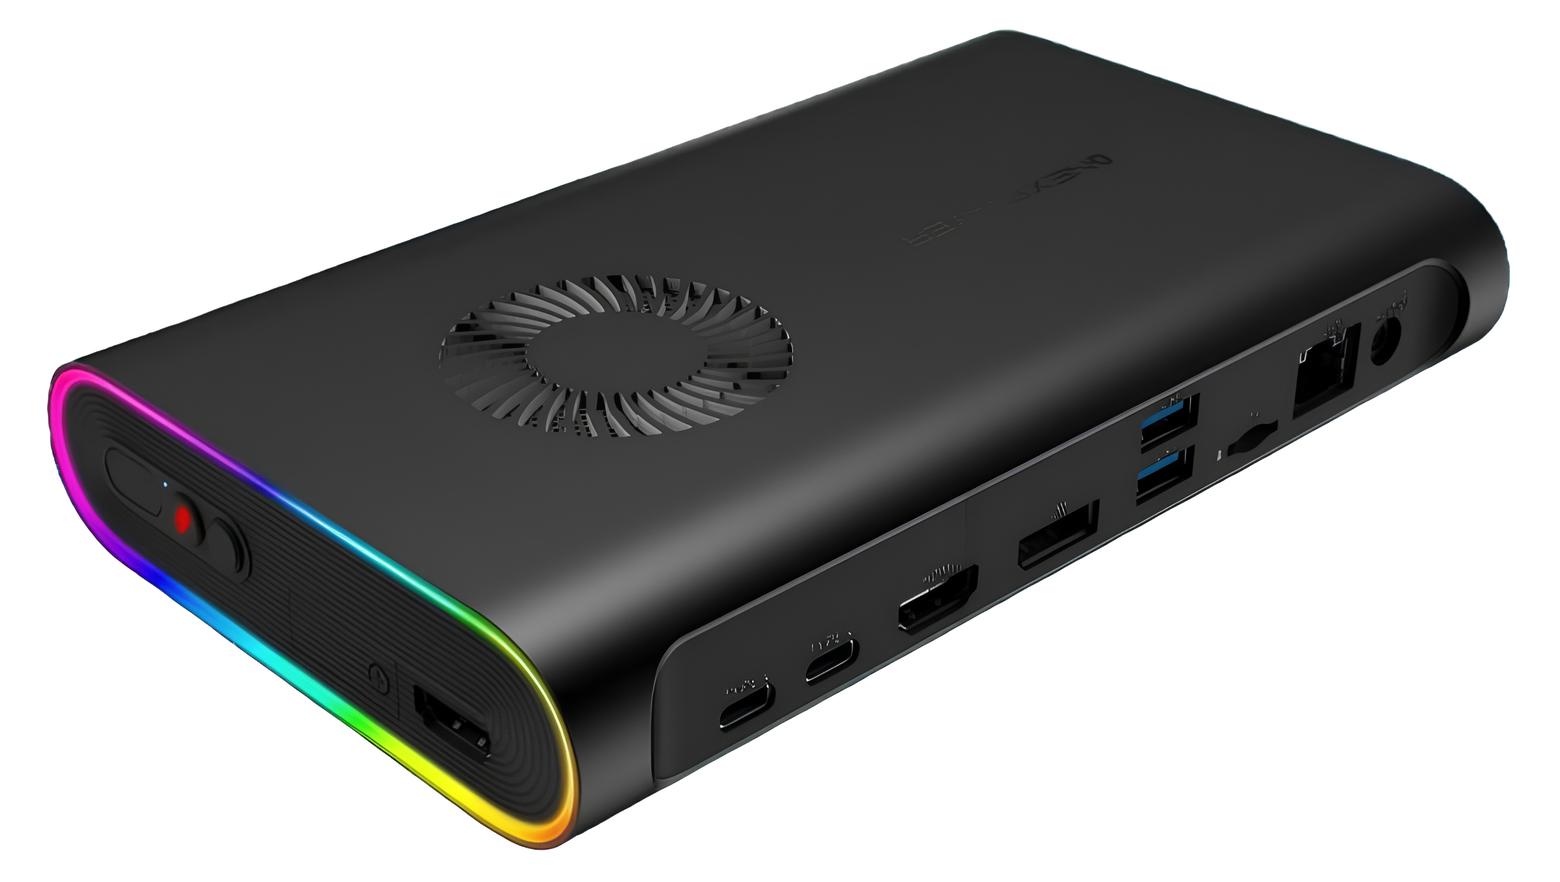 OneXPlayer Intros The M1 Mini PC Which It's Calling The 